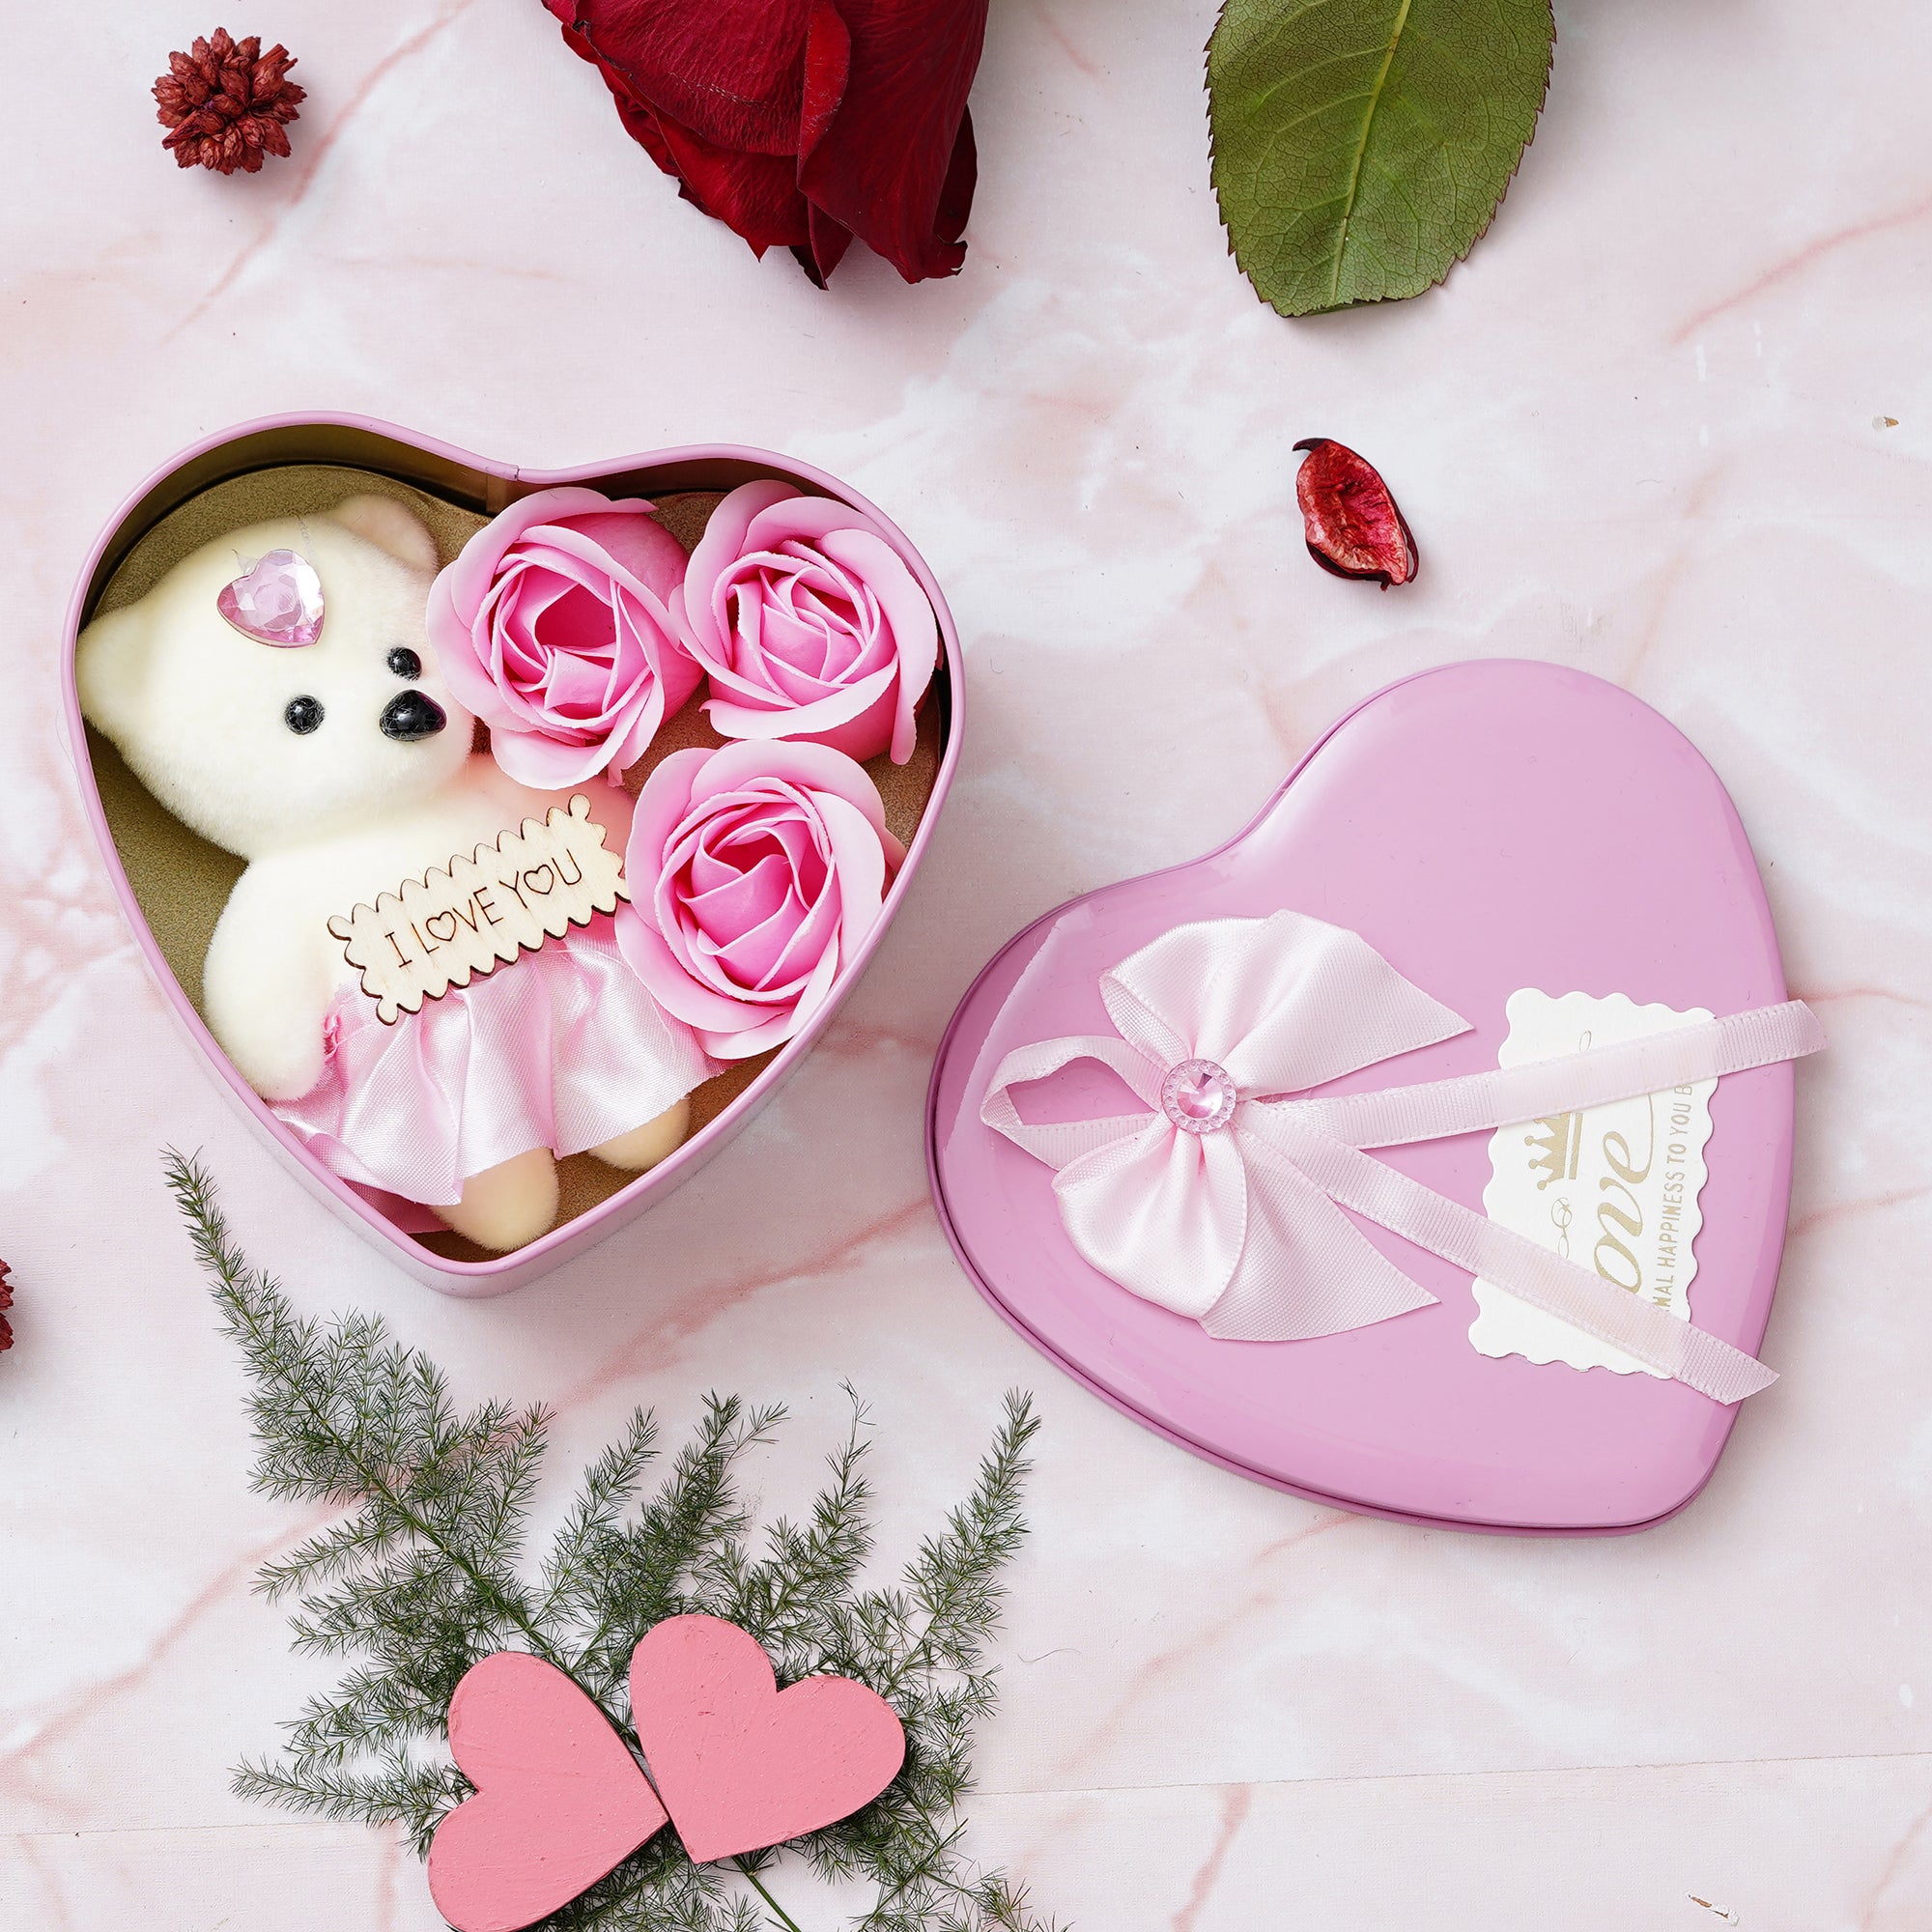 Pink Heart Shaped Gift Box with 3 Pink Roses, Teddy Bear and a Card